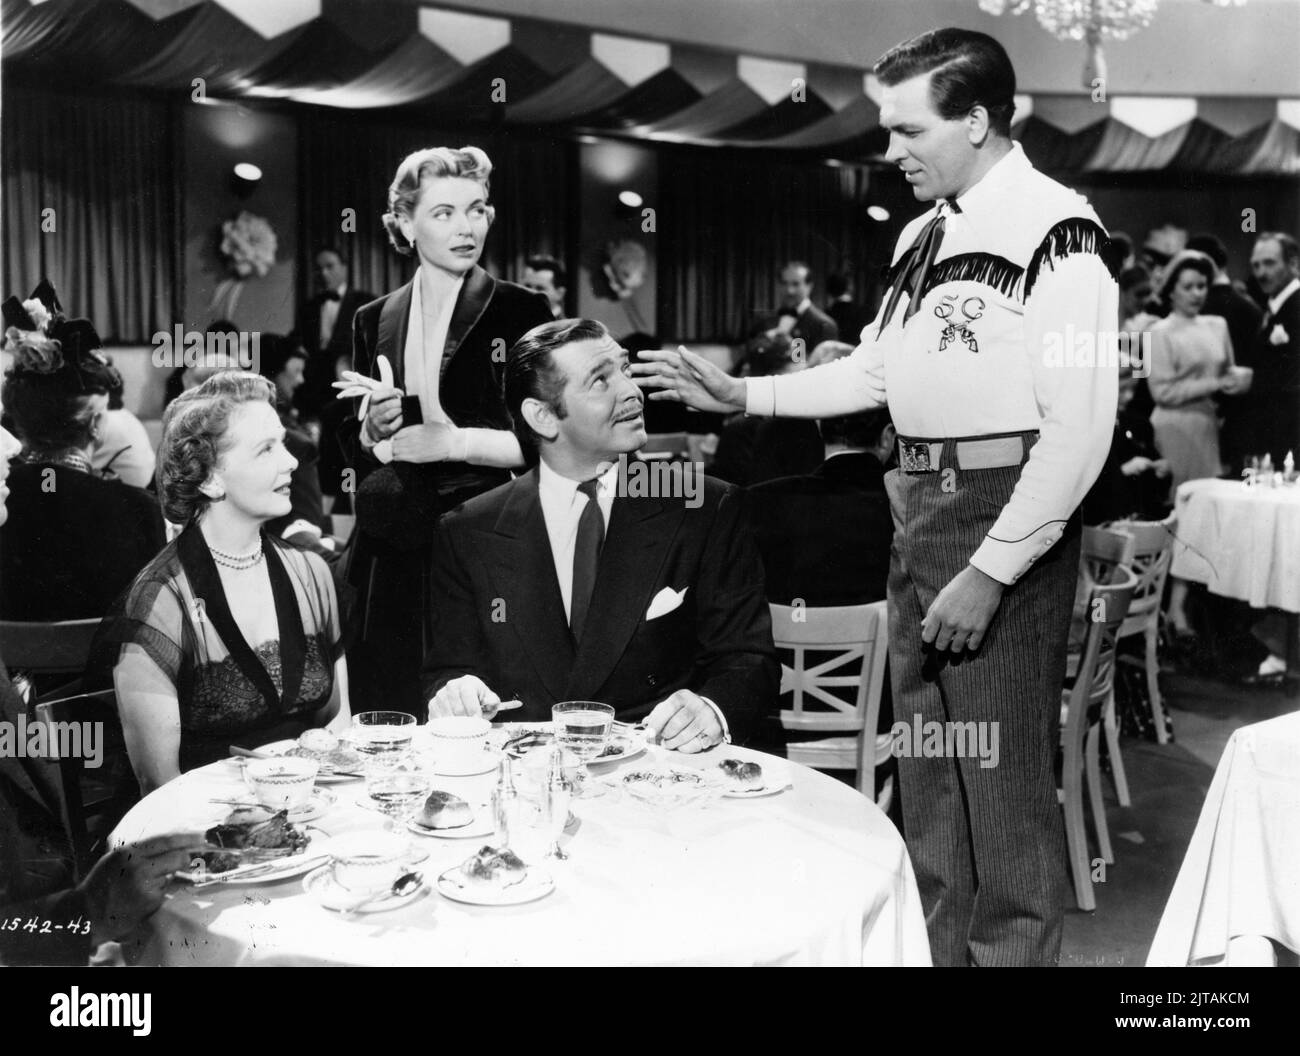 DOROTHY McGUIRE CLARK GABLE (in cameo appearance playing himself) and HOWARD KEEL in CALLAWAY WENT THATAWAY 1951 directors / writers MELVIN FRANK and NORMAN PANAMA Metro Goldwyn Mayer Stock Photo